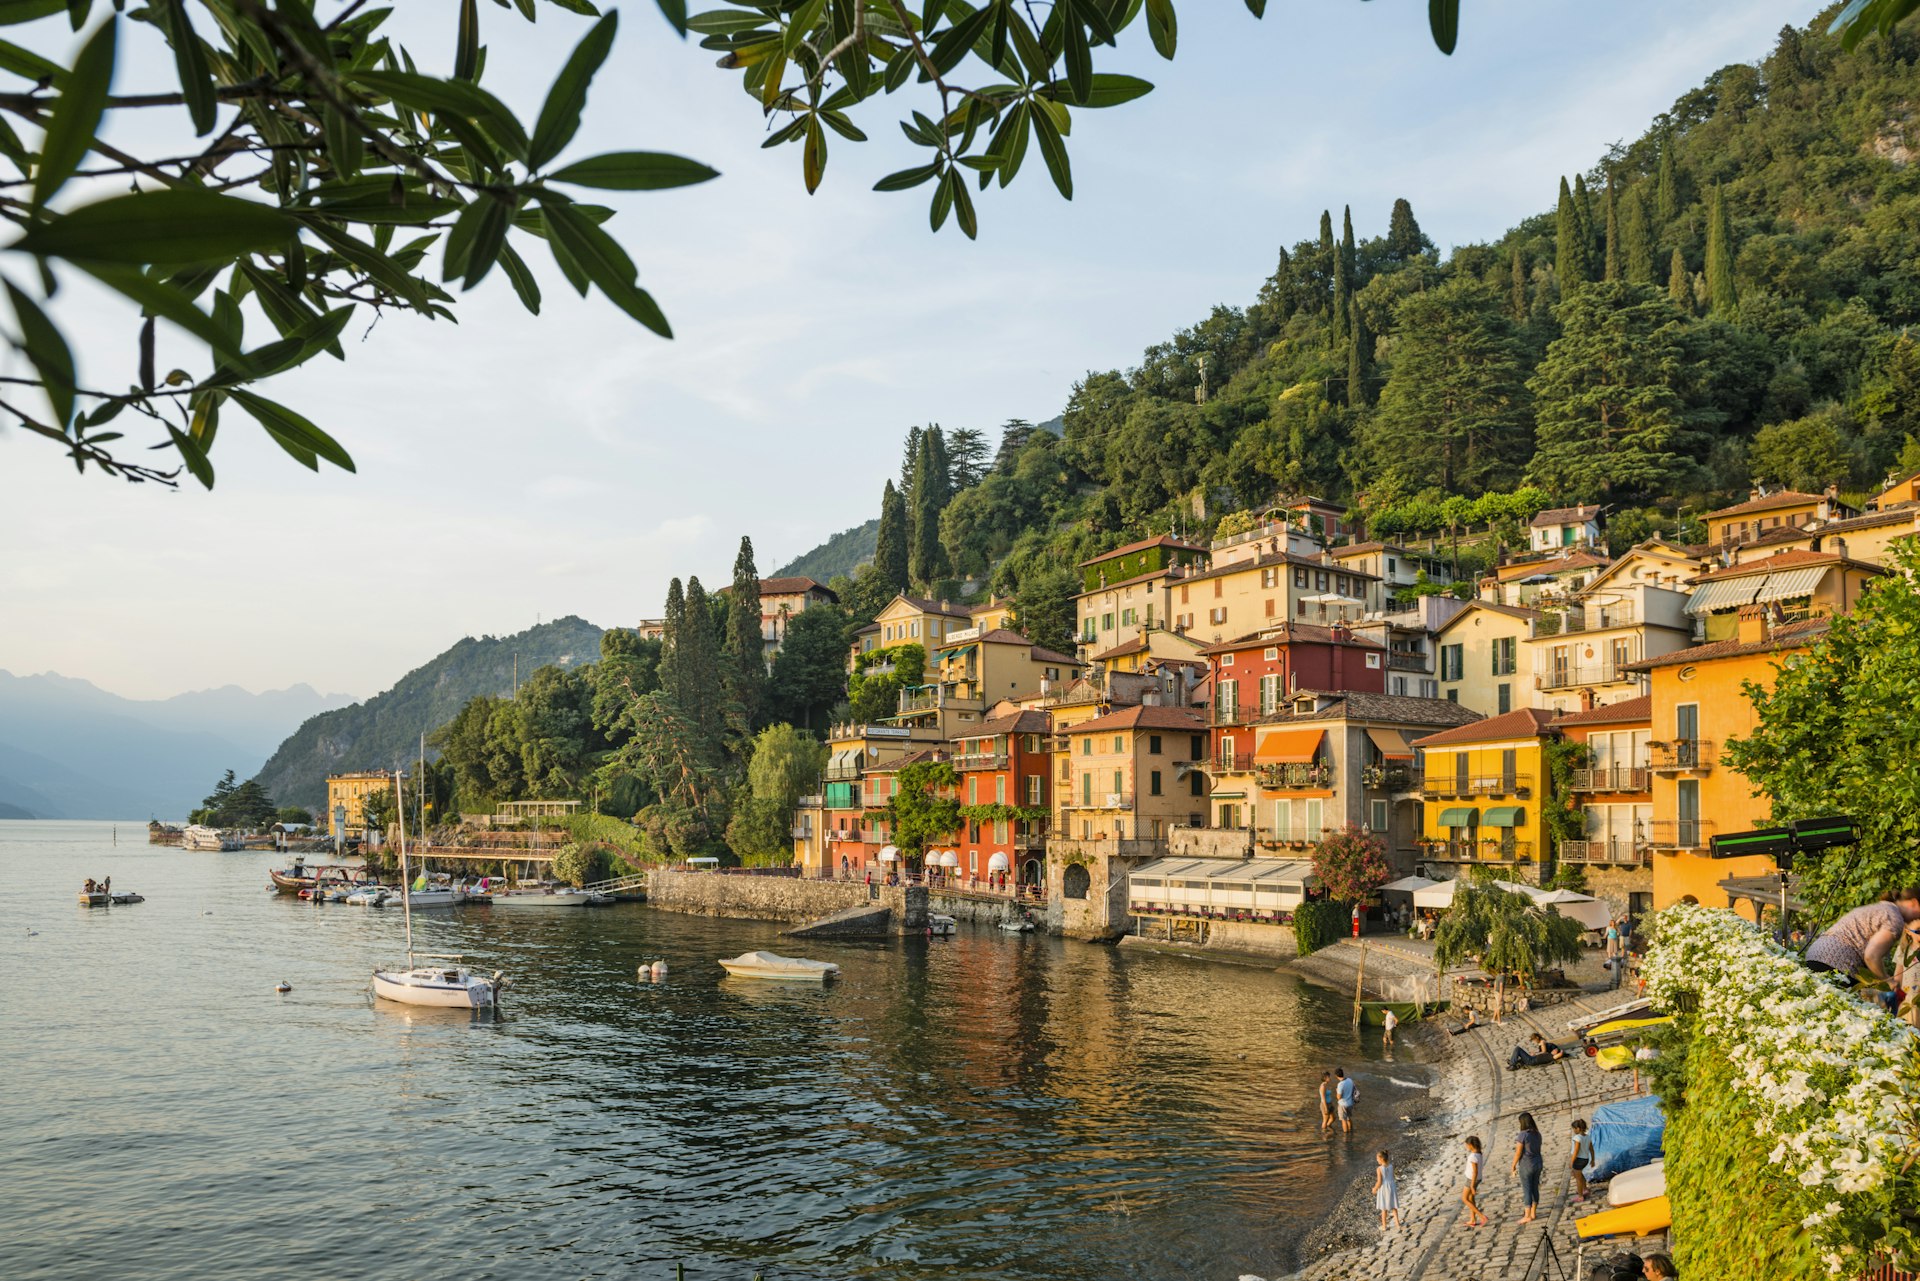 The village of Varenna on the shores of Lake Como. The village has many colourful buildings right by the water's edge, and is backed by dense green forest.